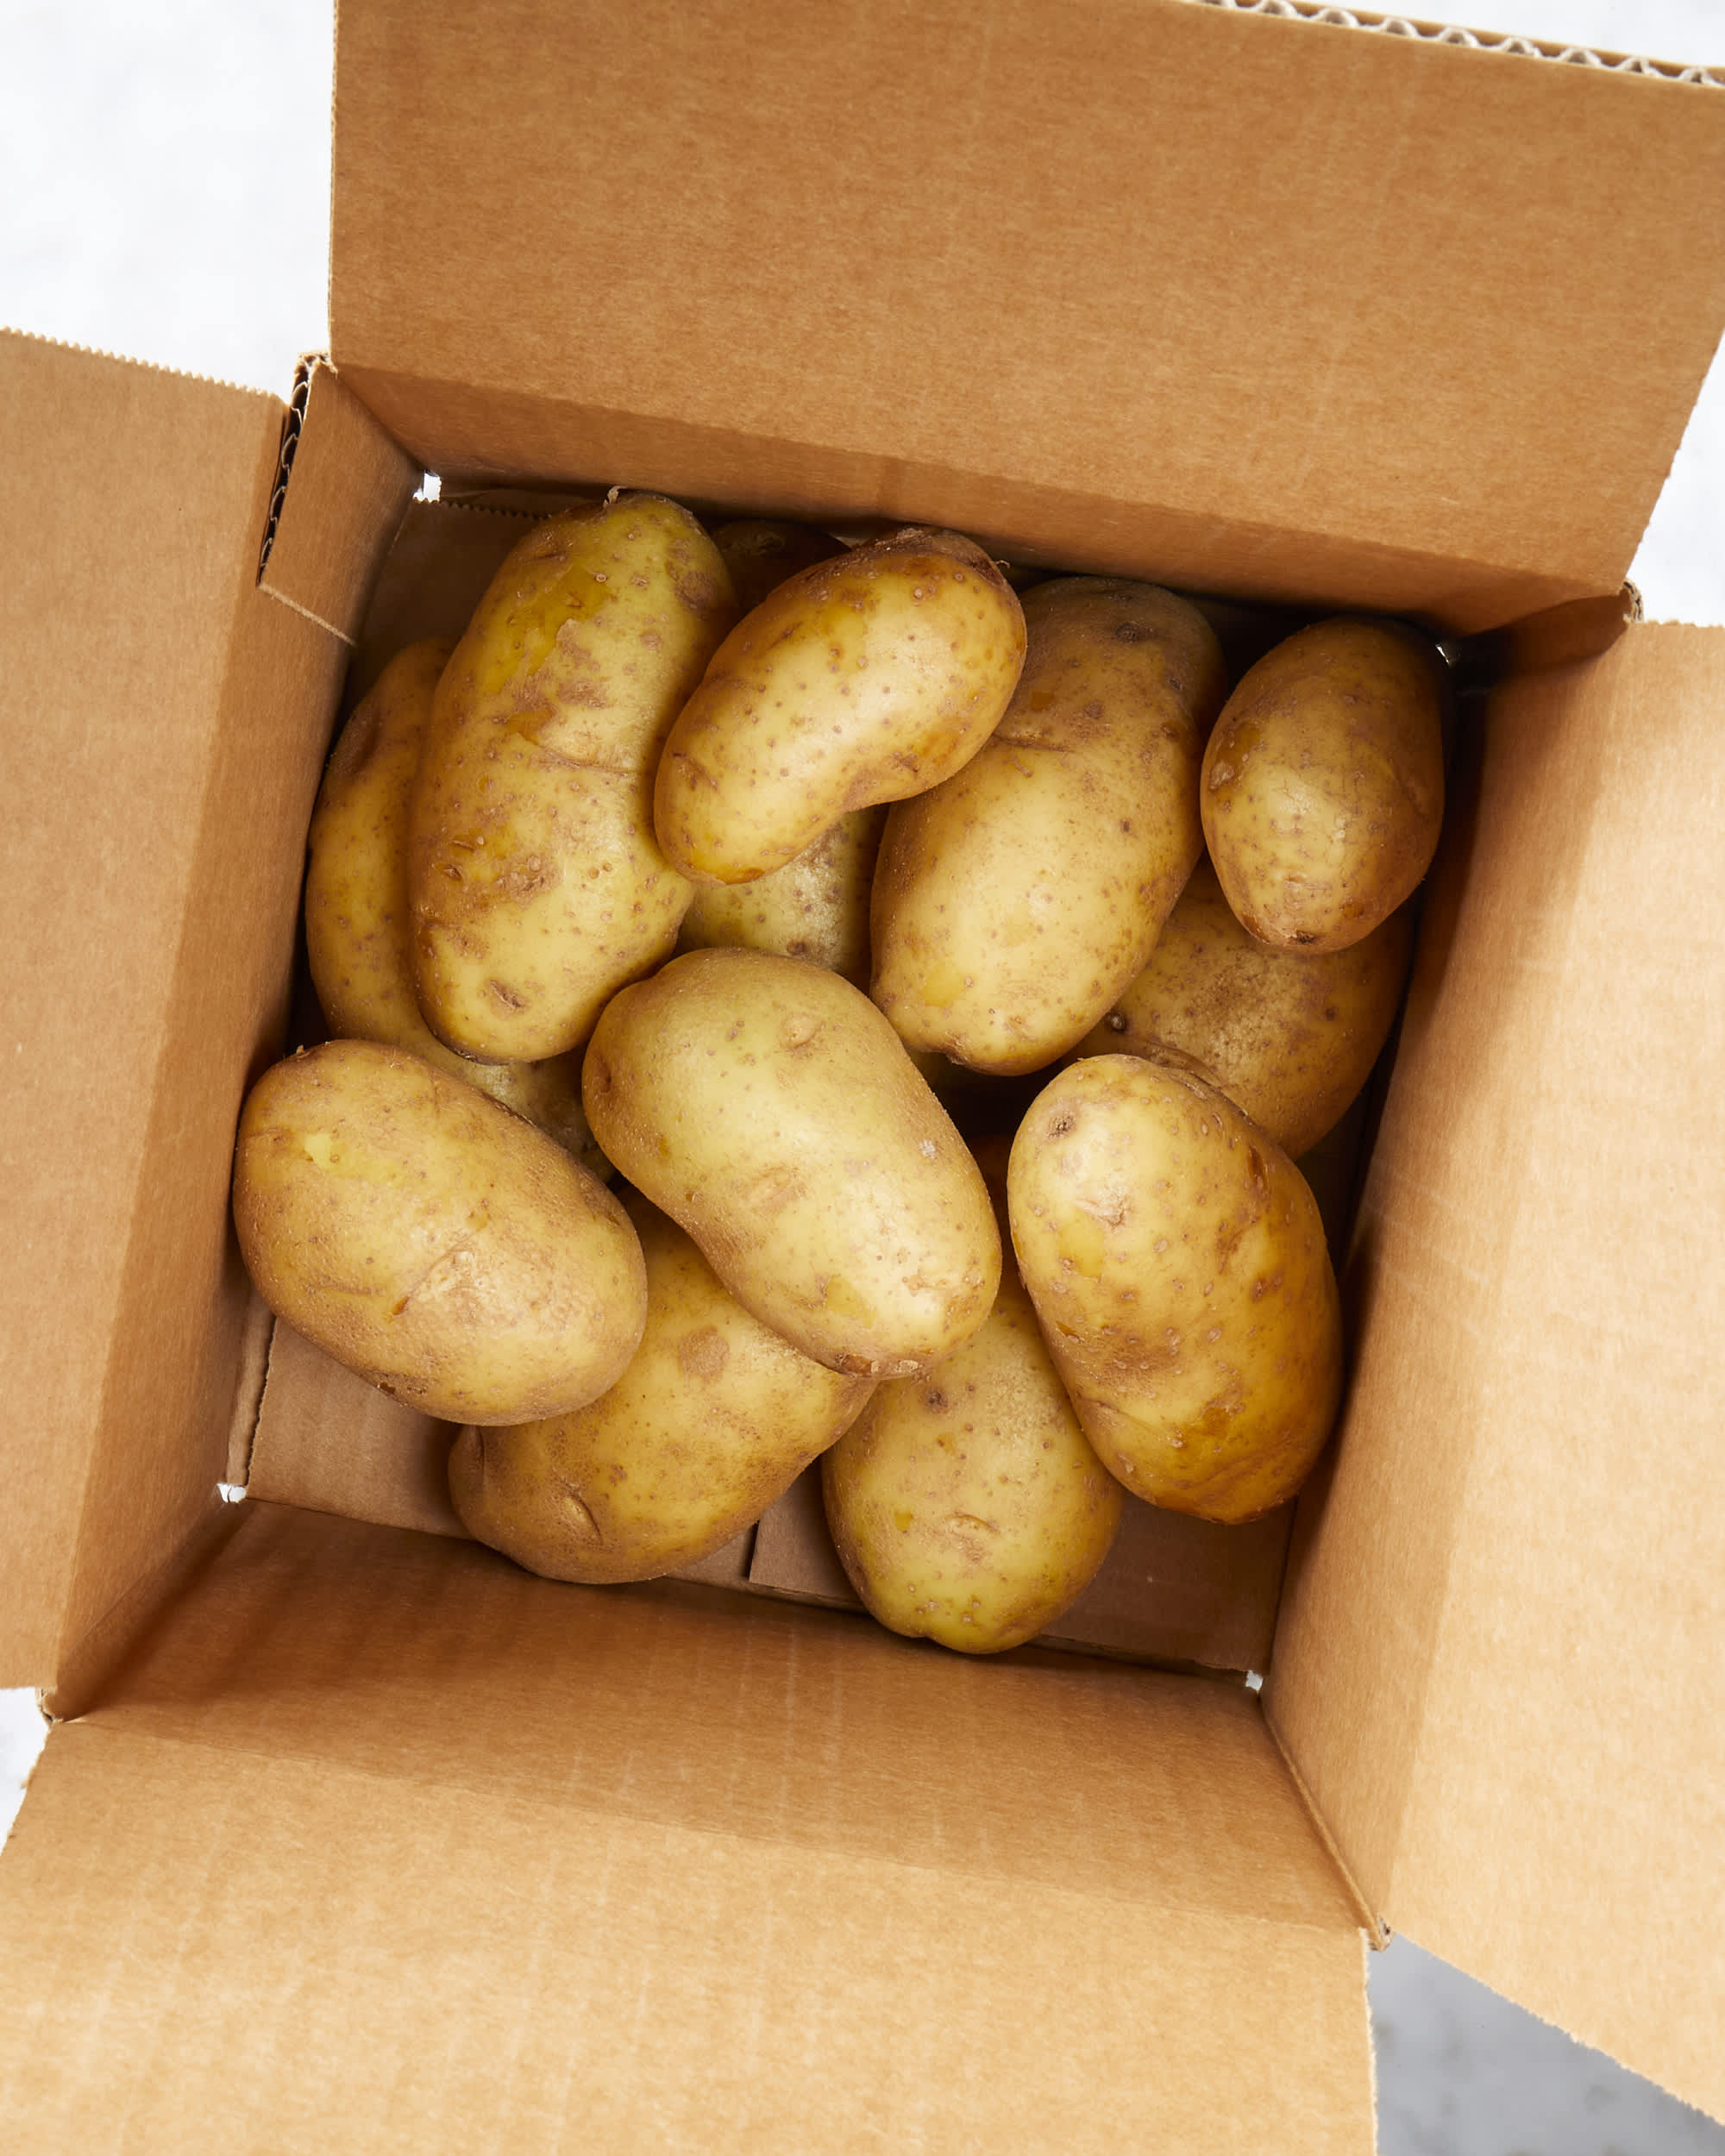 11 Ways to Use Up and Preserve Fresh Potatoes - One Hundred Dollars a Month